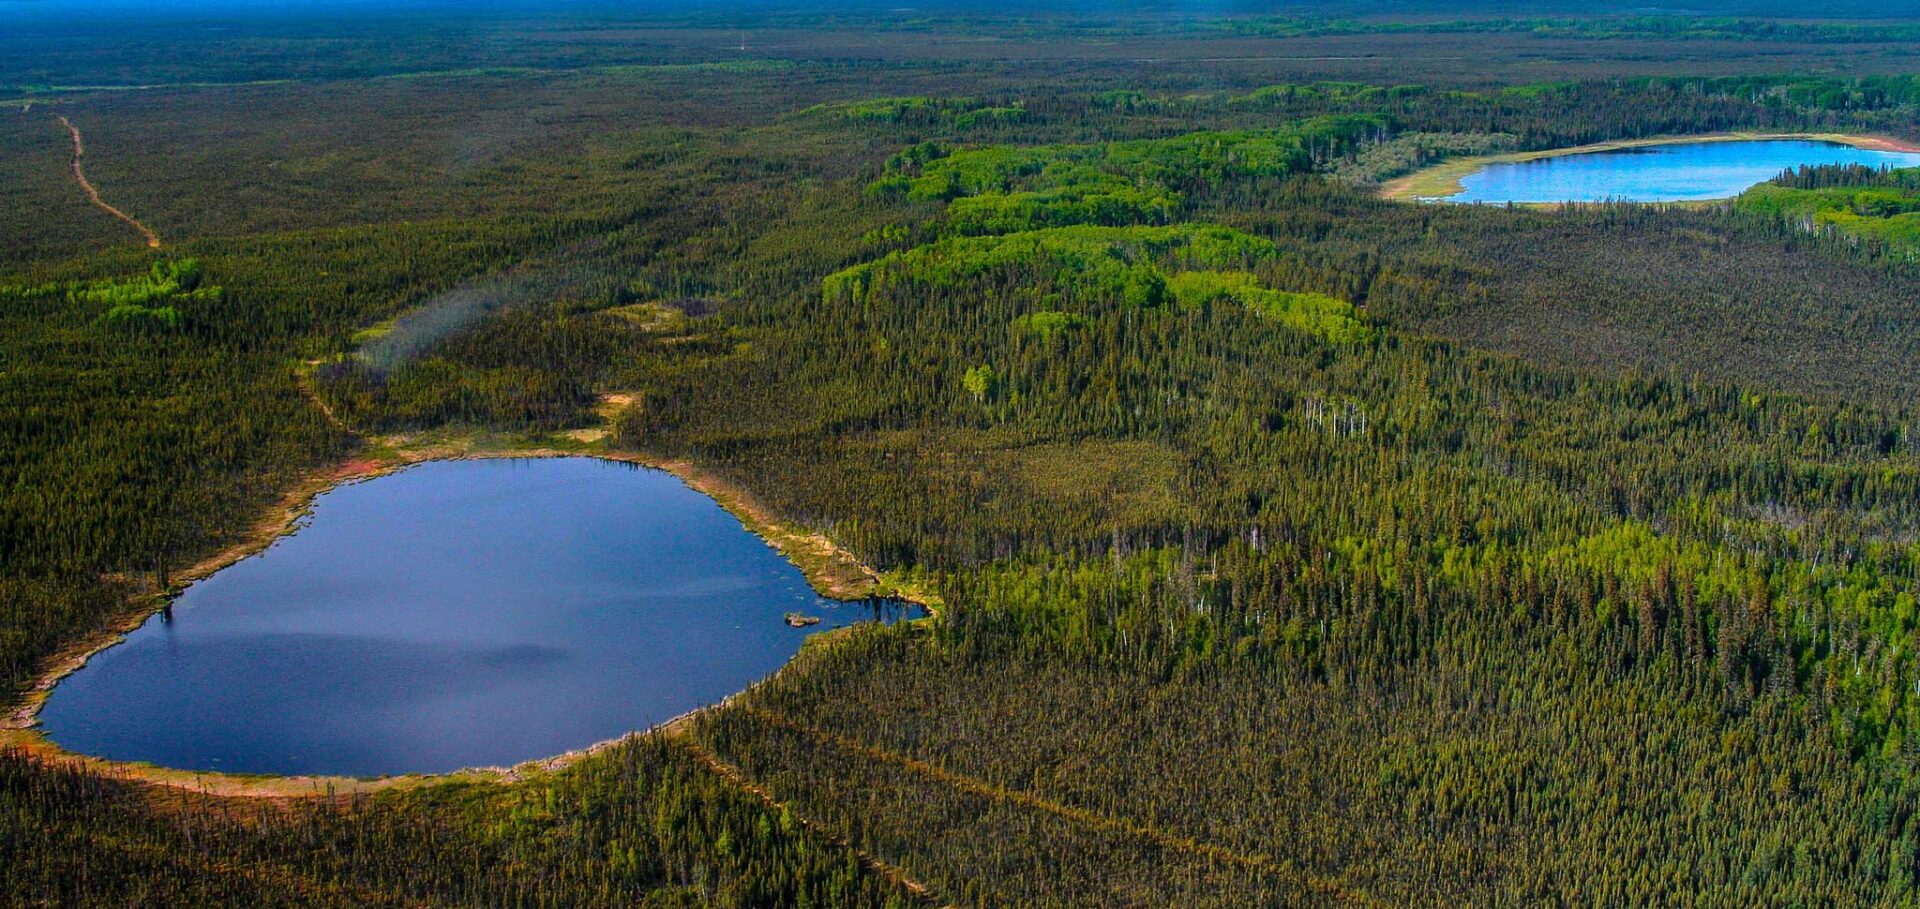 An aerial view of two blue lakes separated by a large evergreen forest.